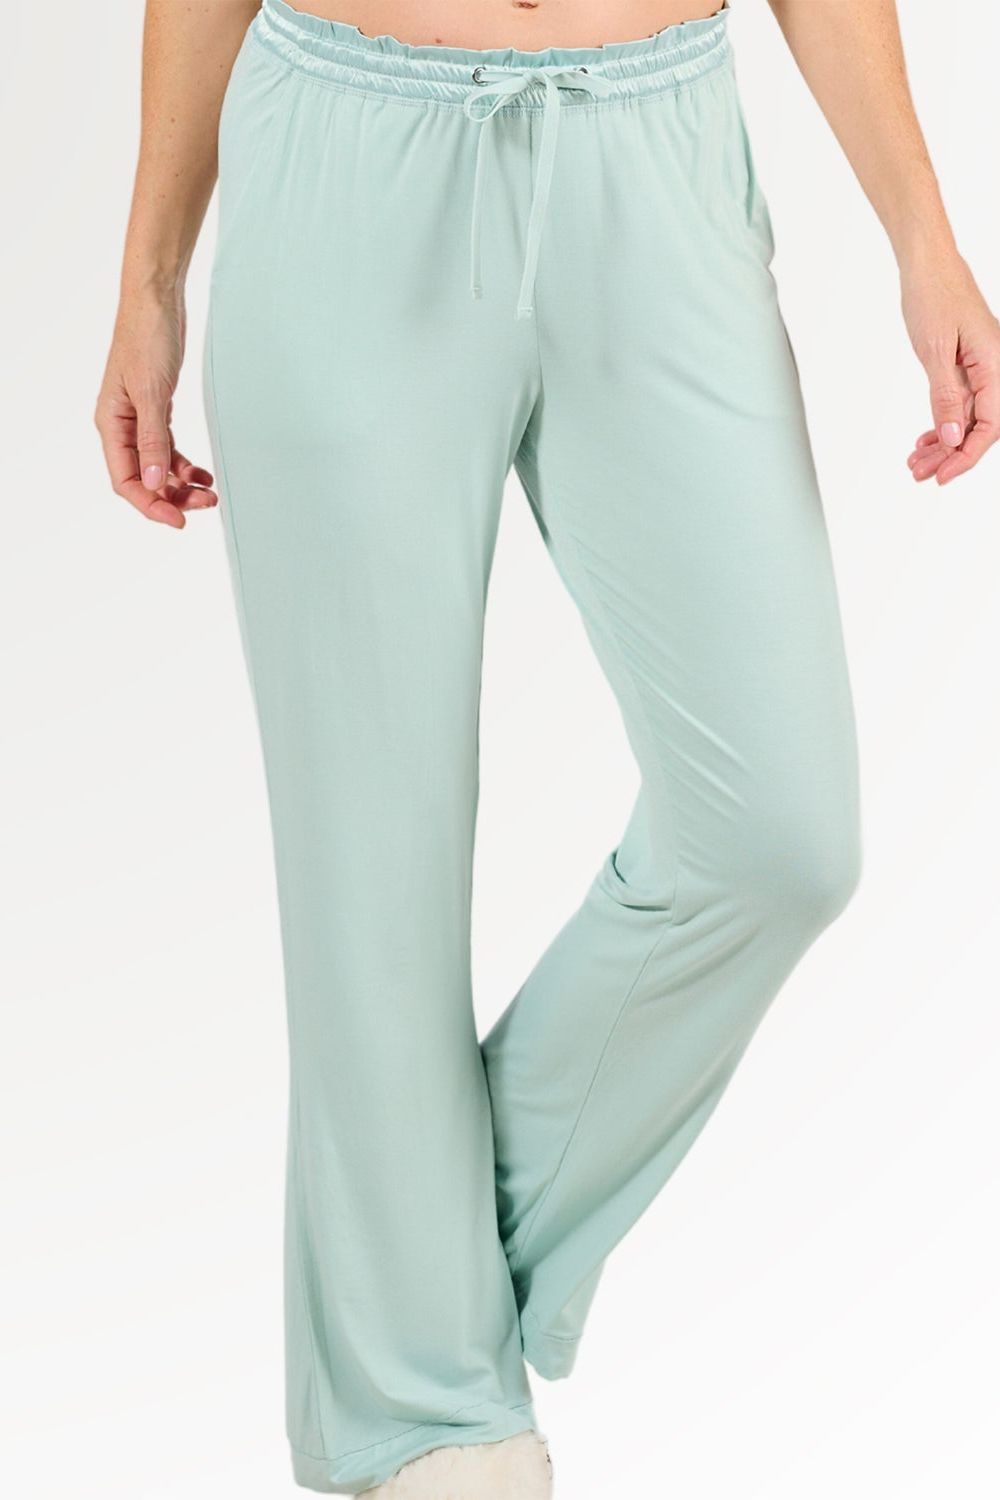 Bamboo Modal Womens Pyjama Bottoms Sale Large Size Color Pajamas With Wide  Leg Pants For Autumn, Yoga, And Home Wear From Immortwine, $20.81